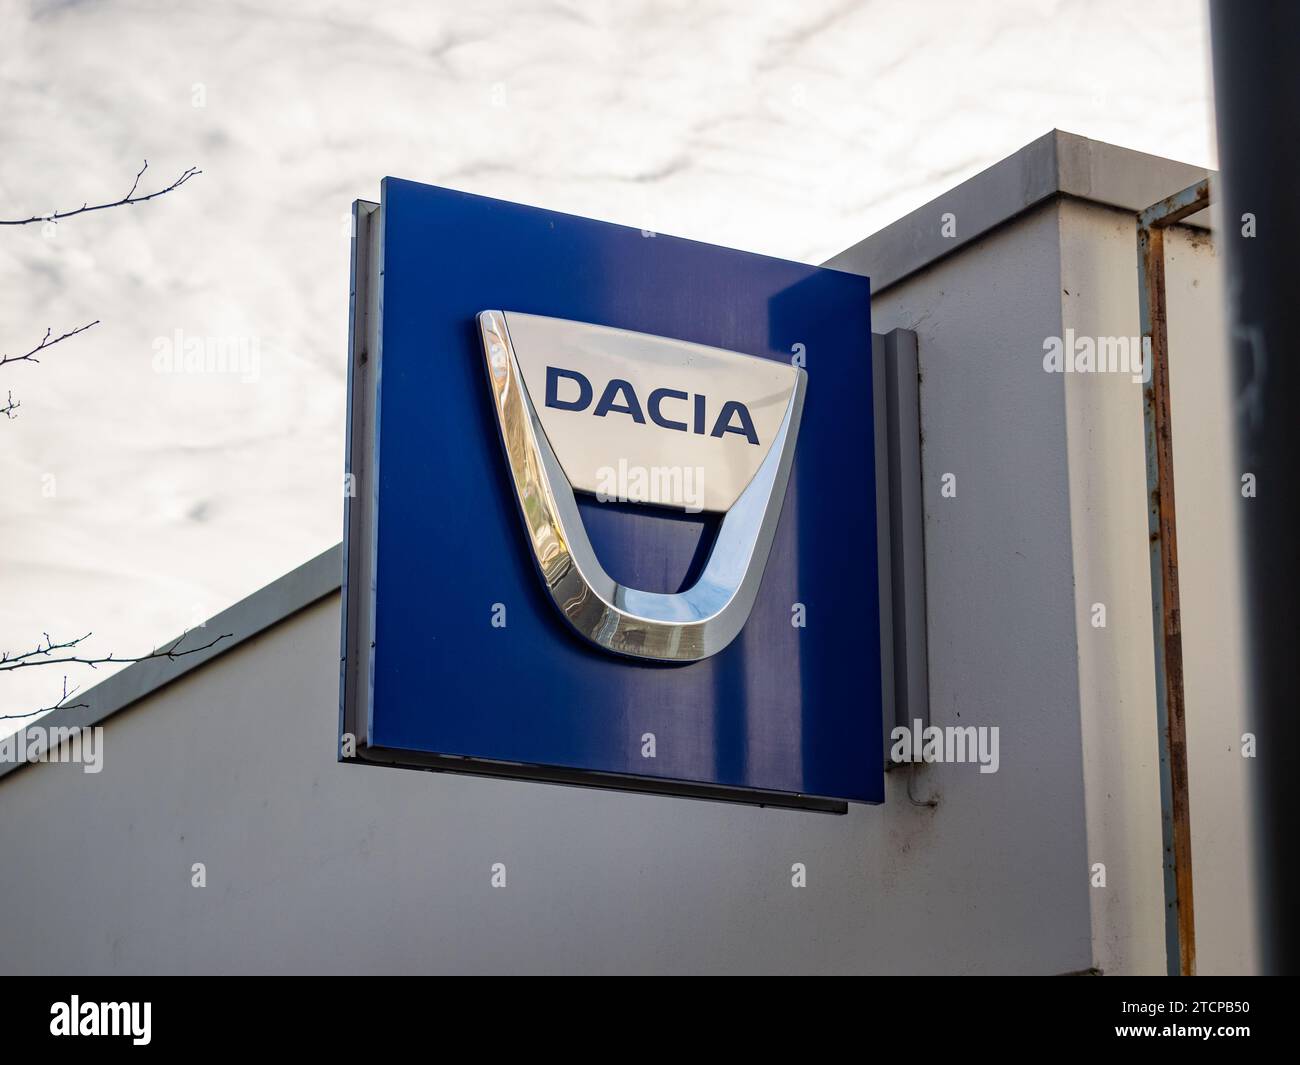 Dacia logo sign of the Romanian car manufacturer. The emblem is mounted to the exterior of a car dealer building. Cheap vehicles for sale in Europe. Stock Photo